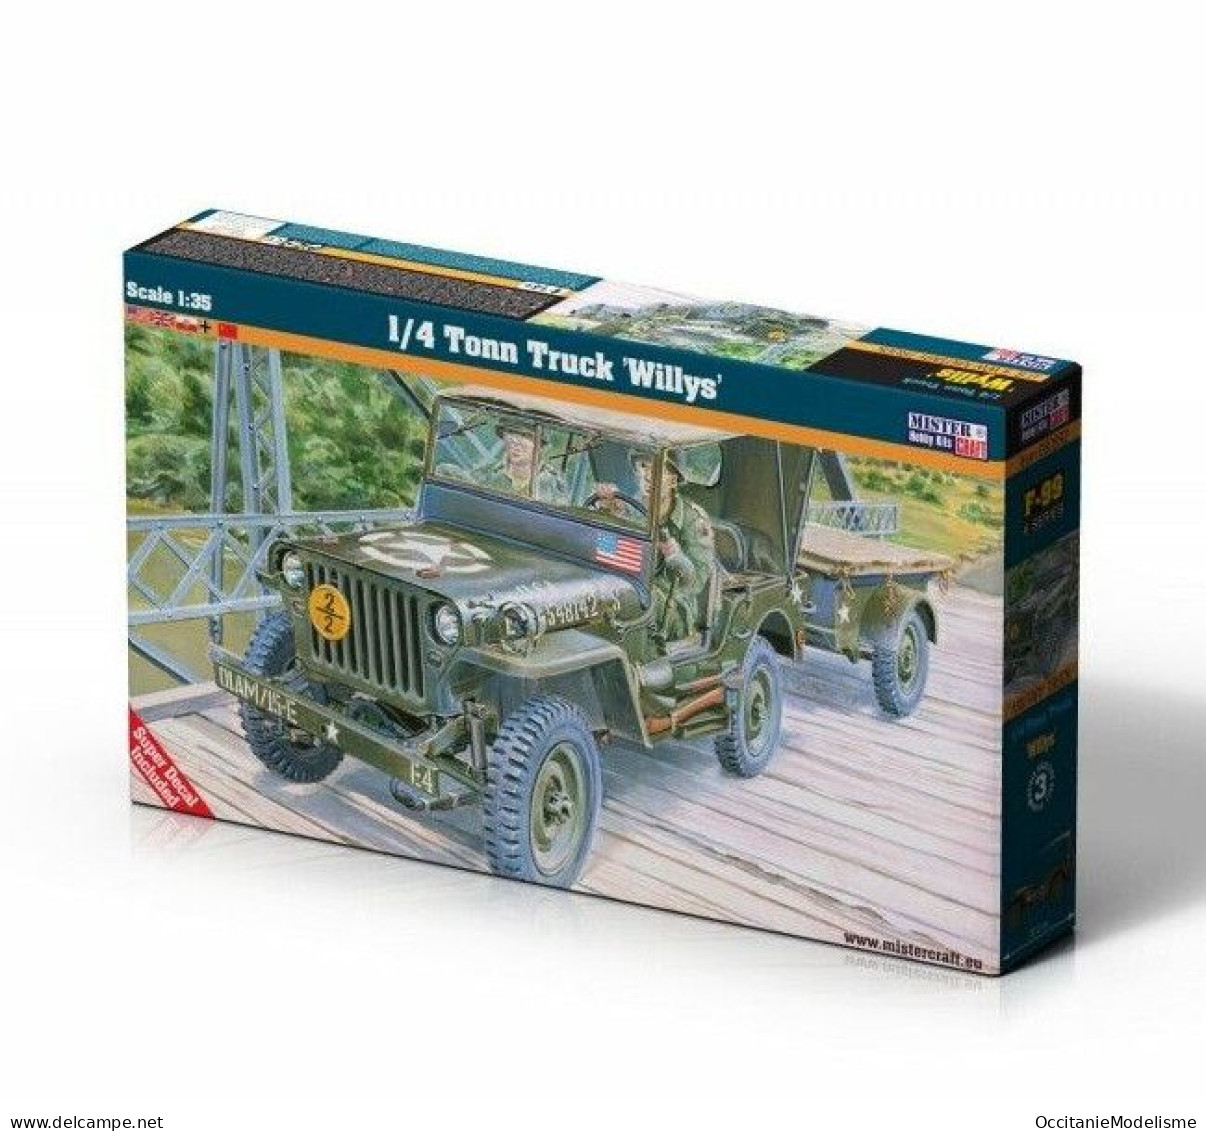 MisterCraft - WILLYS JEEP 1/4 Ton Truck + Trailer Maquette Kit Plastique Réf. F-299 Neuf NBO 1/35 - Military Vehicles